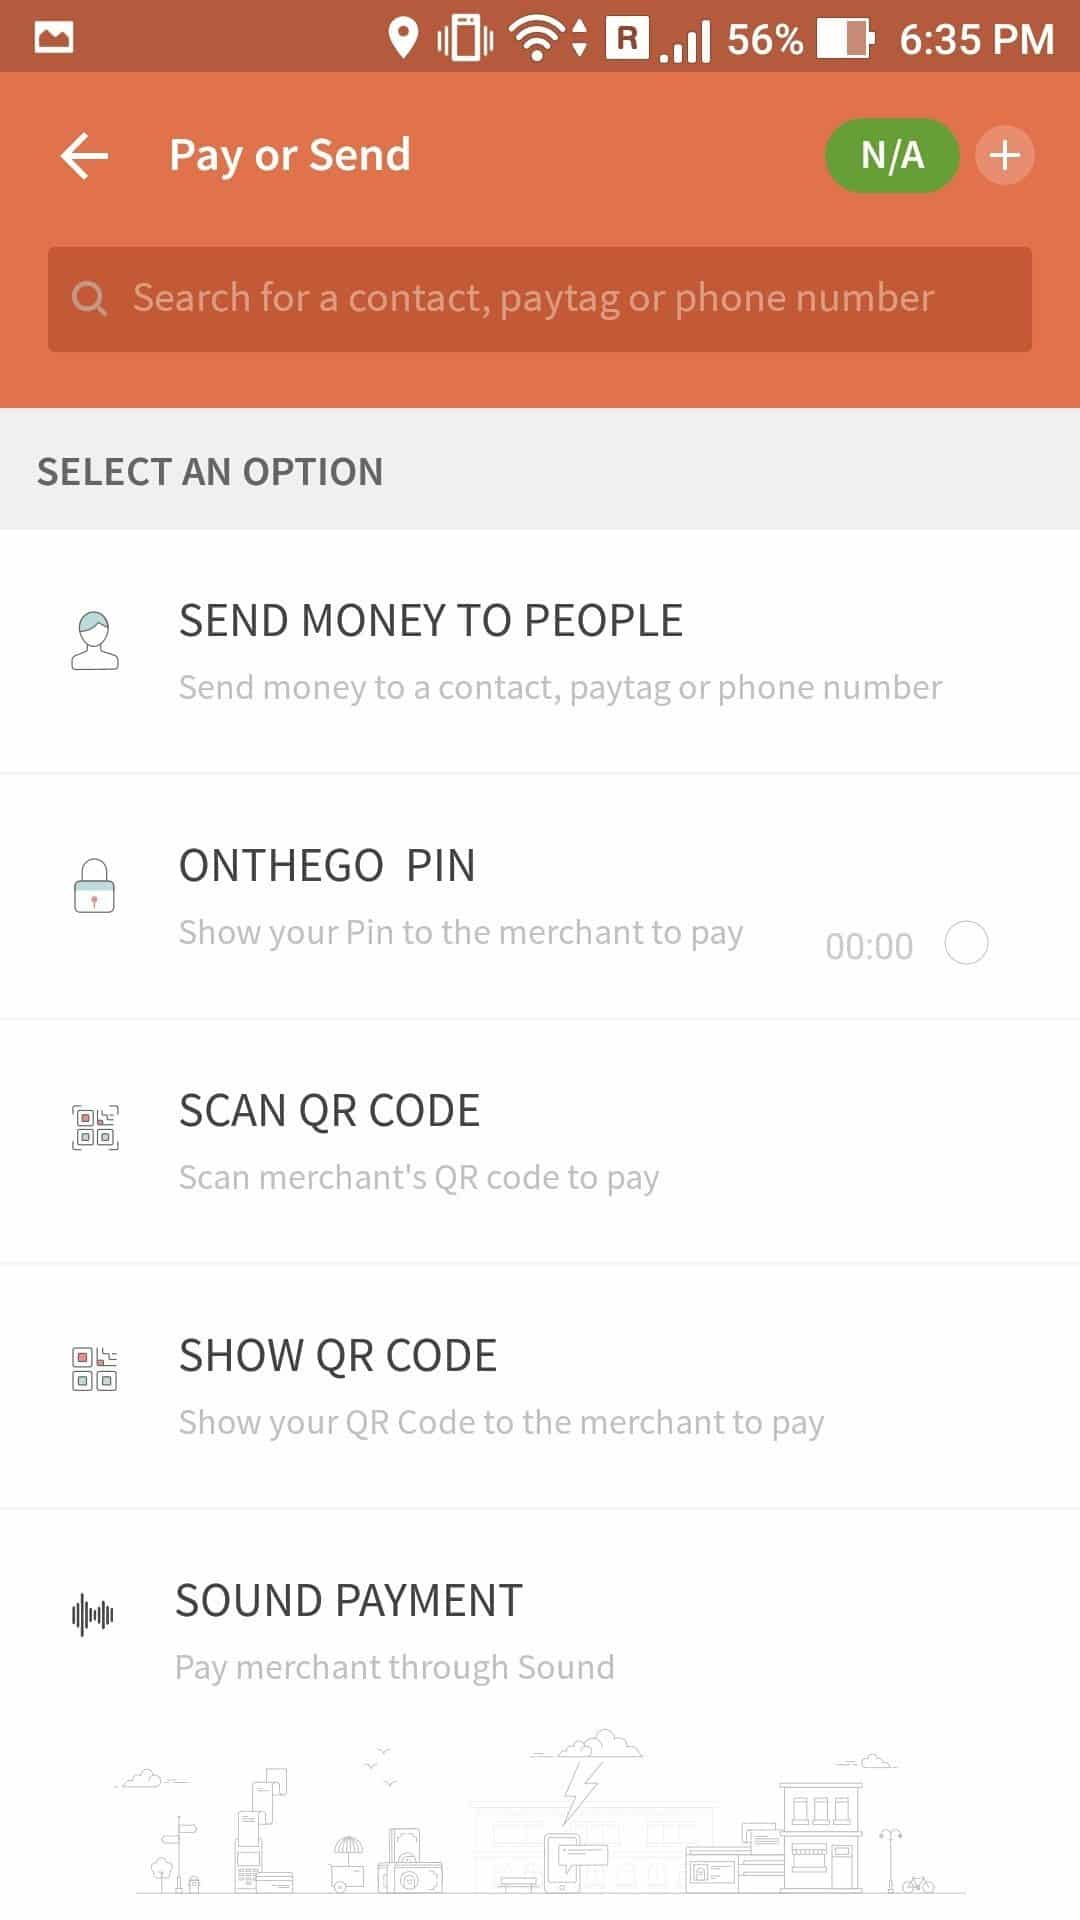 Freecharge App Review - Your Personal Digital Wallet to help you fight demonetisation! - 7